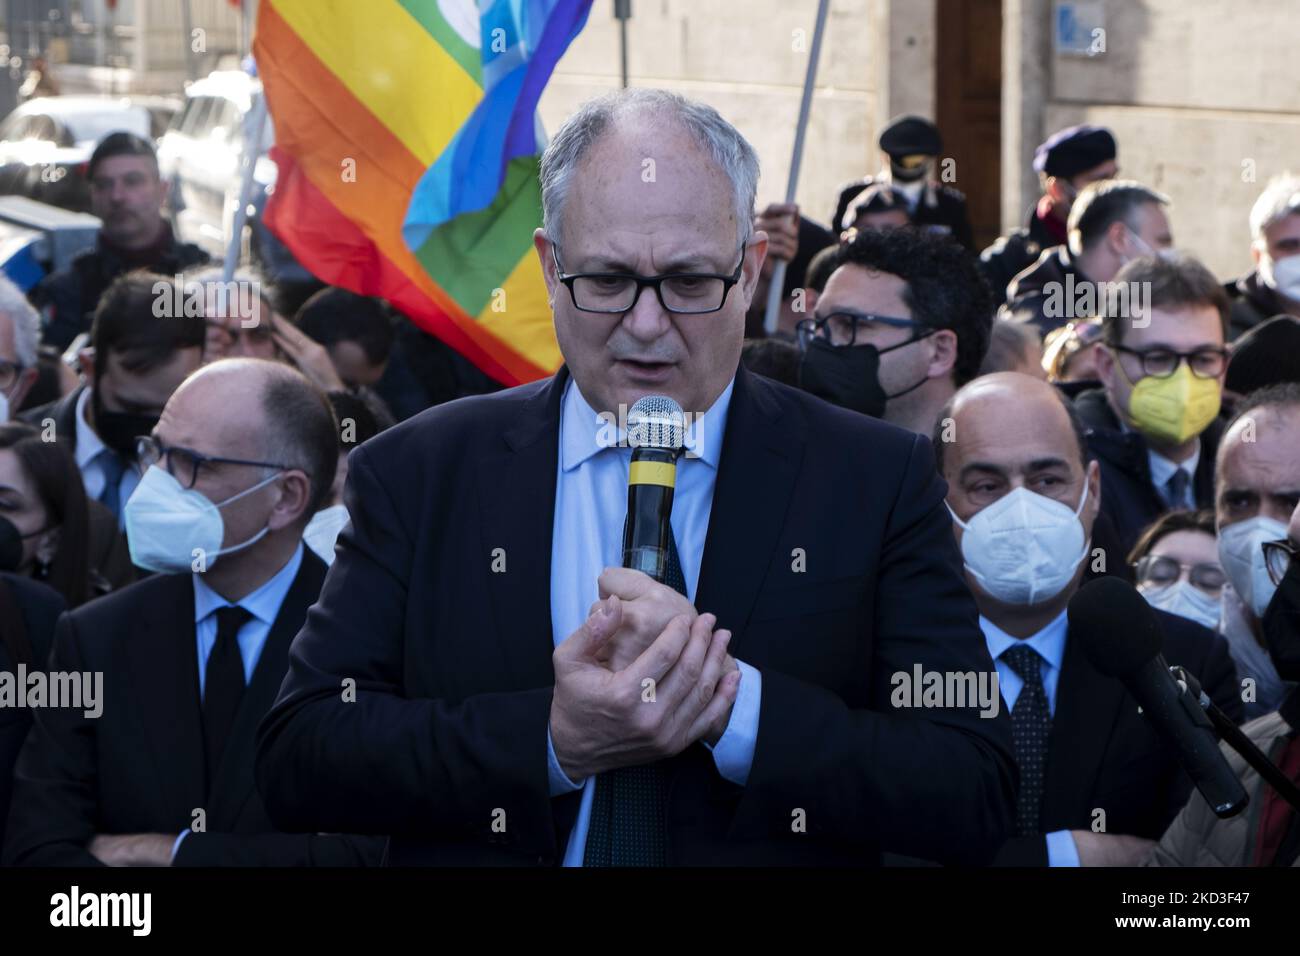 The mayor of Rome Roberto Gualtieri gives a speech against the war in Ukraine, in Rome, Italy, on February 24, 2022. As the conflict in Ukraine get worse, a demonstration to support the country is held nearby the Russian embassy in Castro Pretorio, Rome. The demonstration was organized by the Christian Association of Ukrainians and was supported by many other groups. (Photo by Francesco Boscarol/NurPhoto) Stock Photo